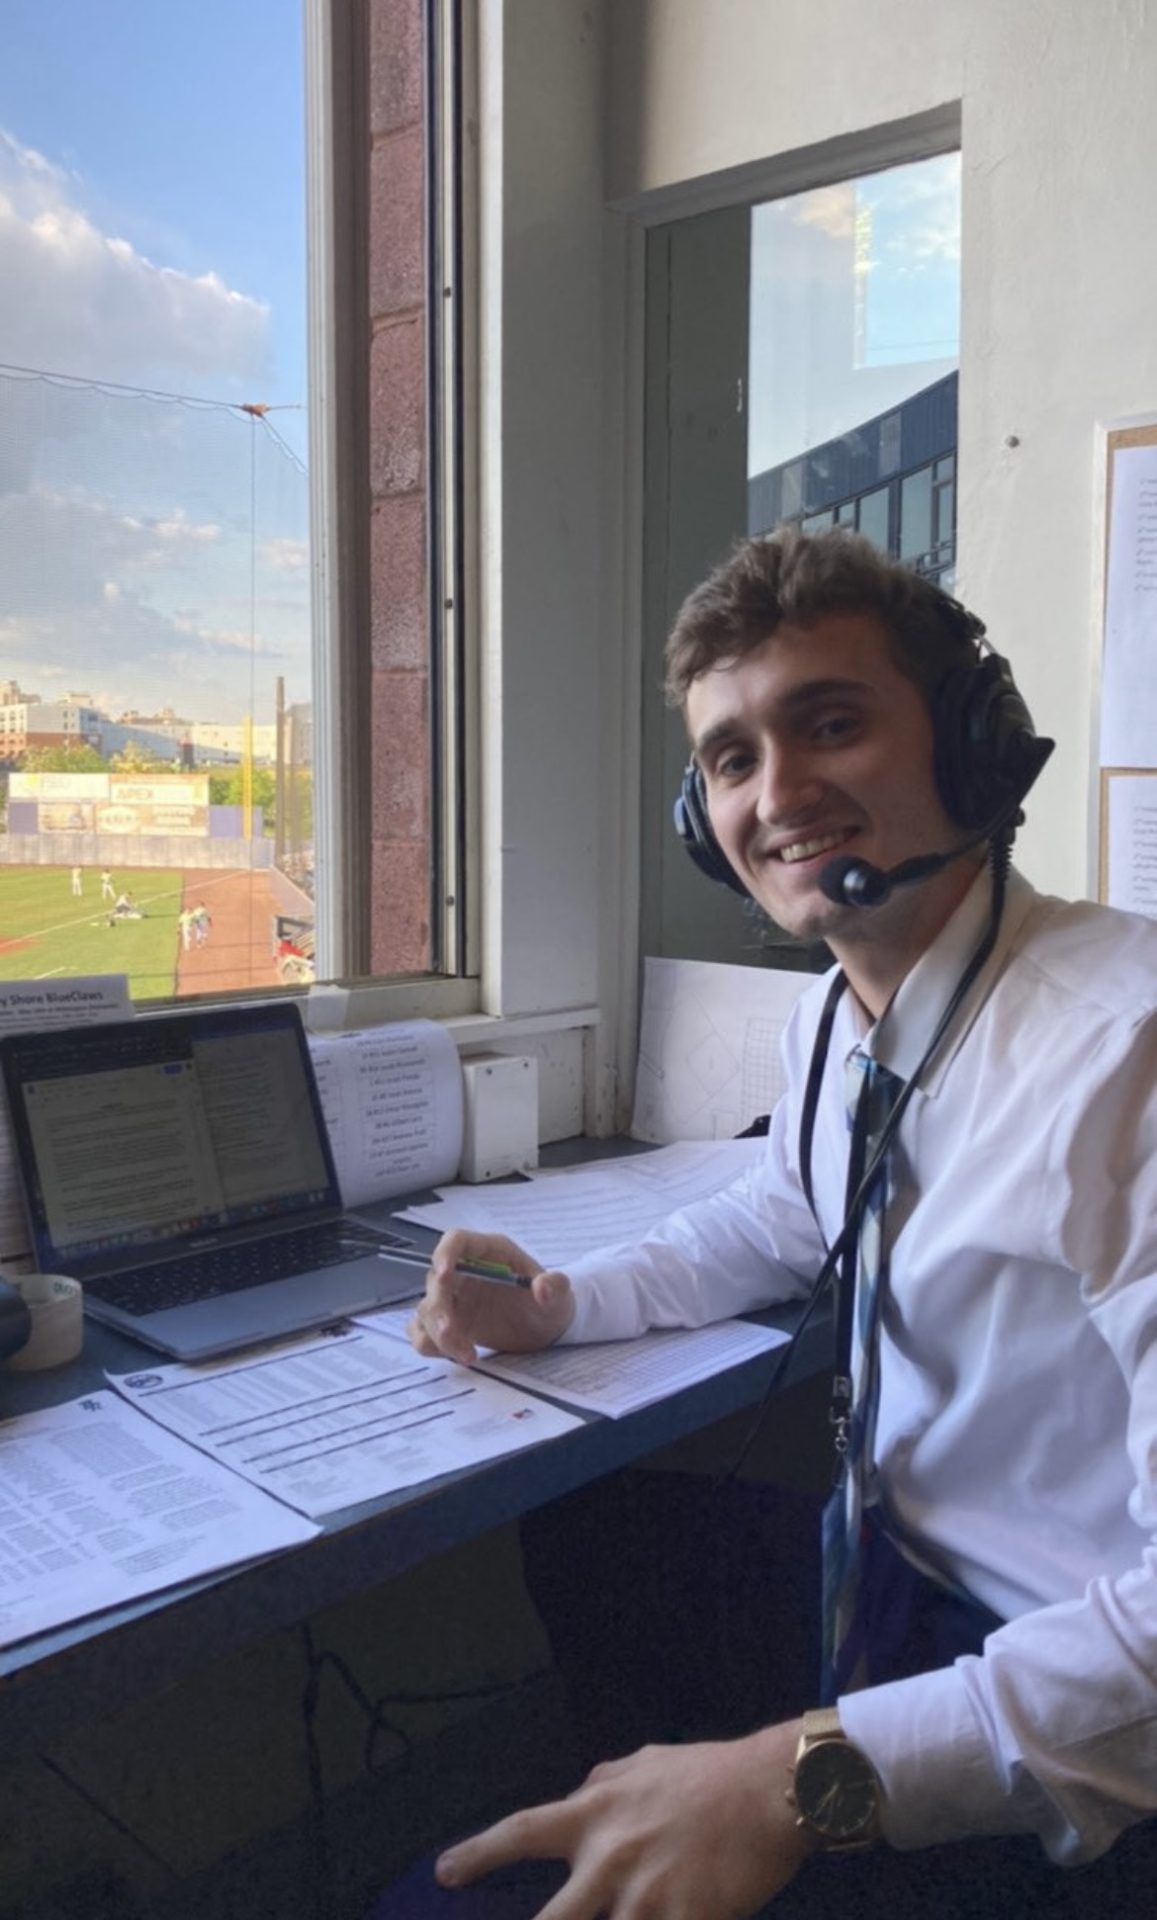 Danny Ryan wears business attire while working the booth at a baseball game.